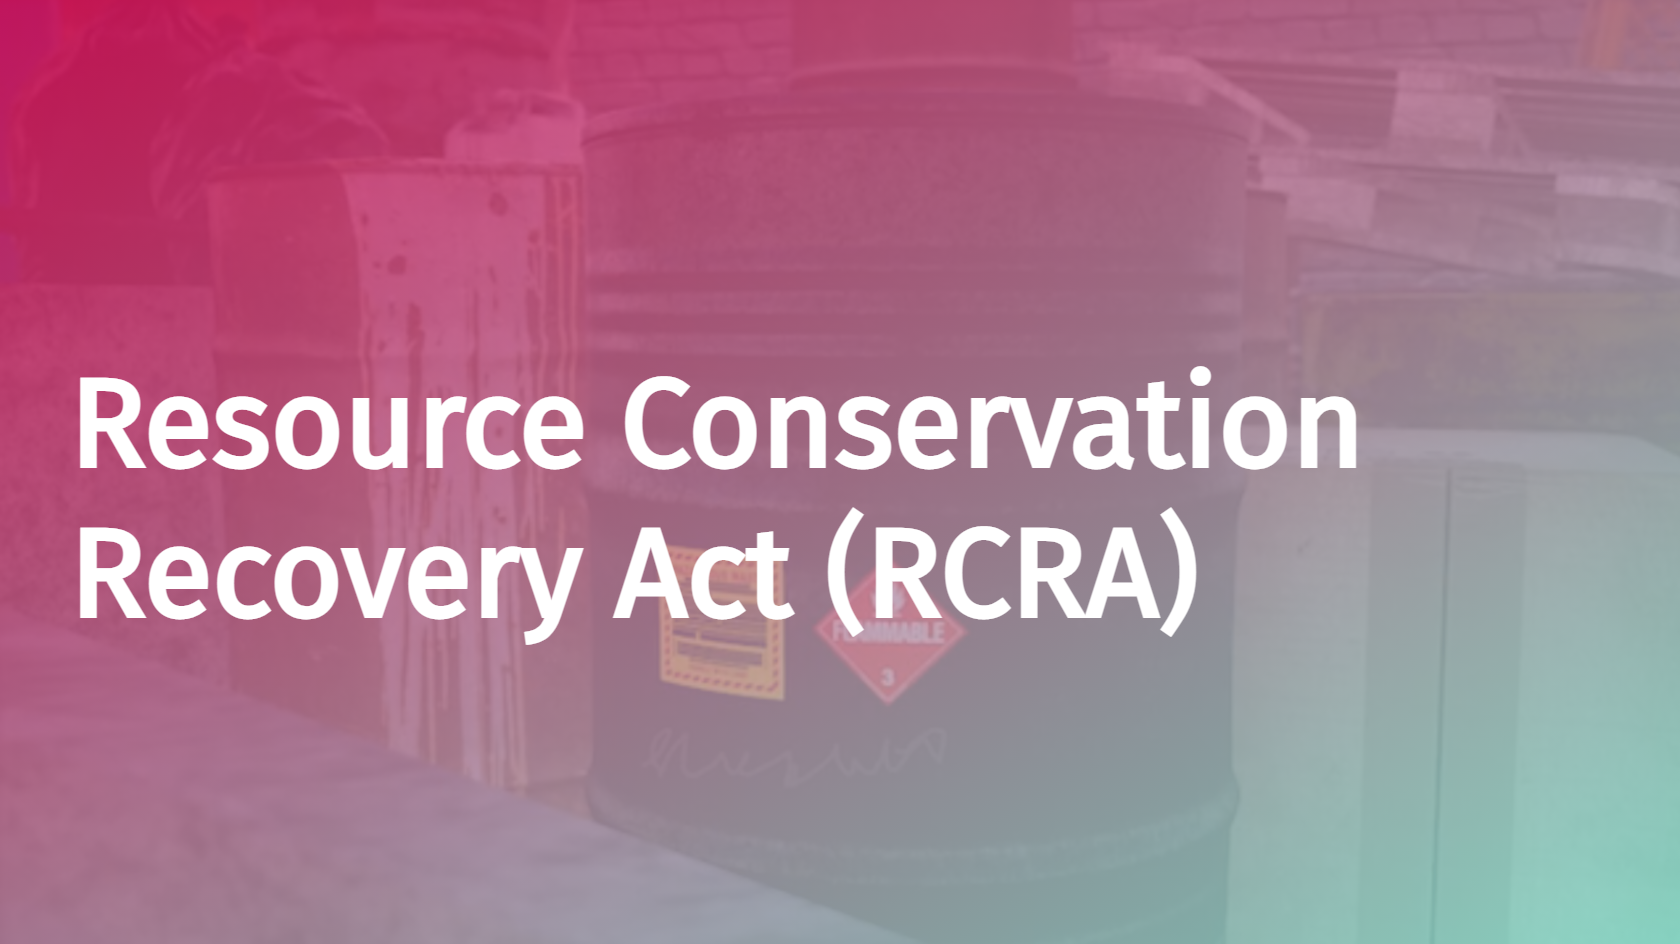 Resource Conservation Recovery Act (RCRA)